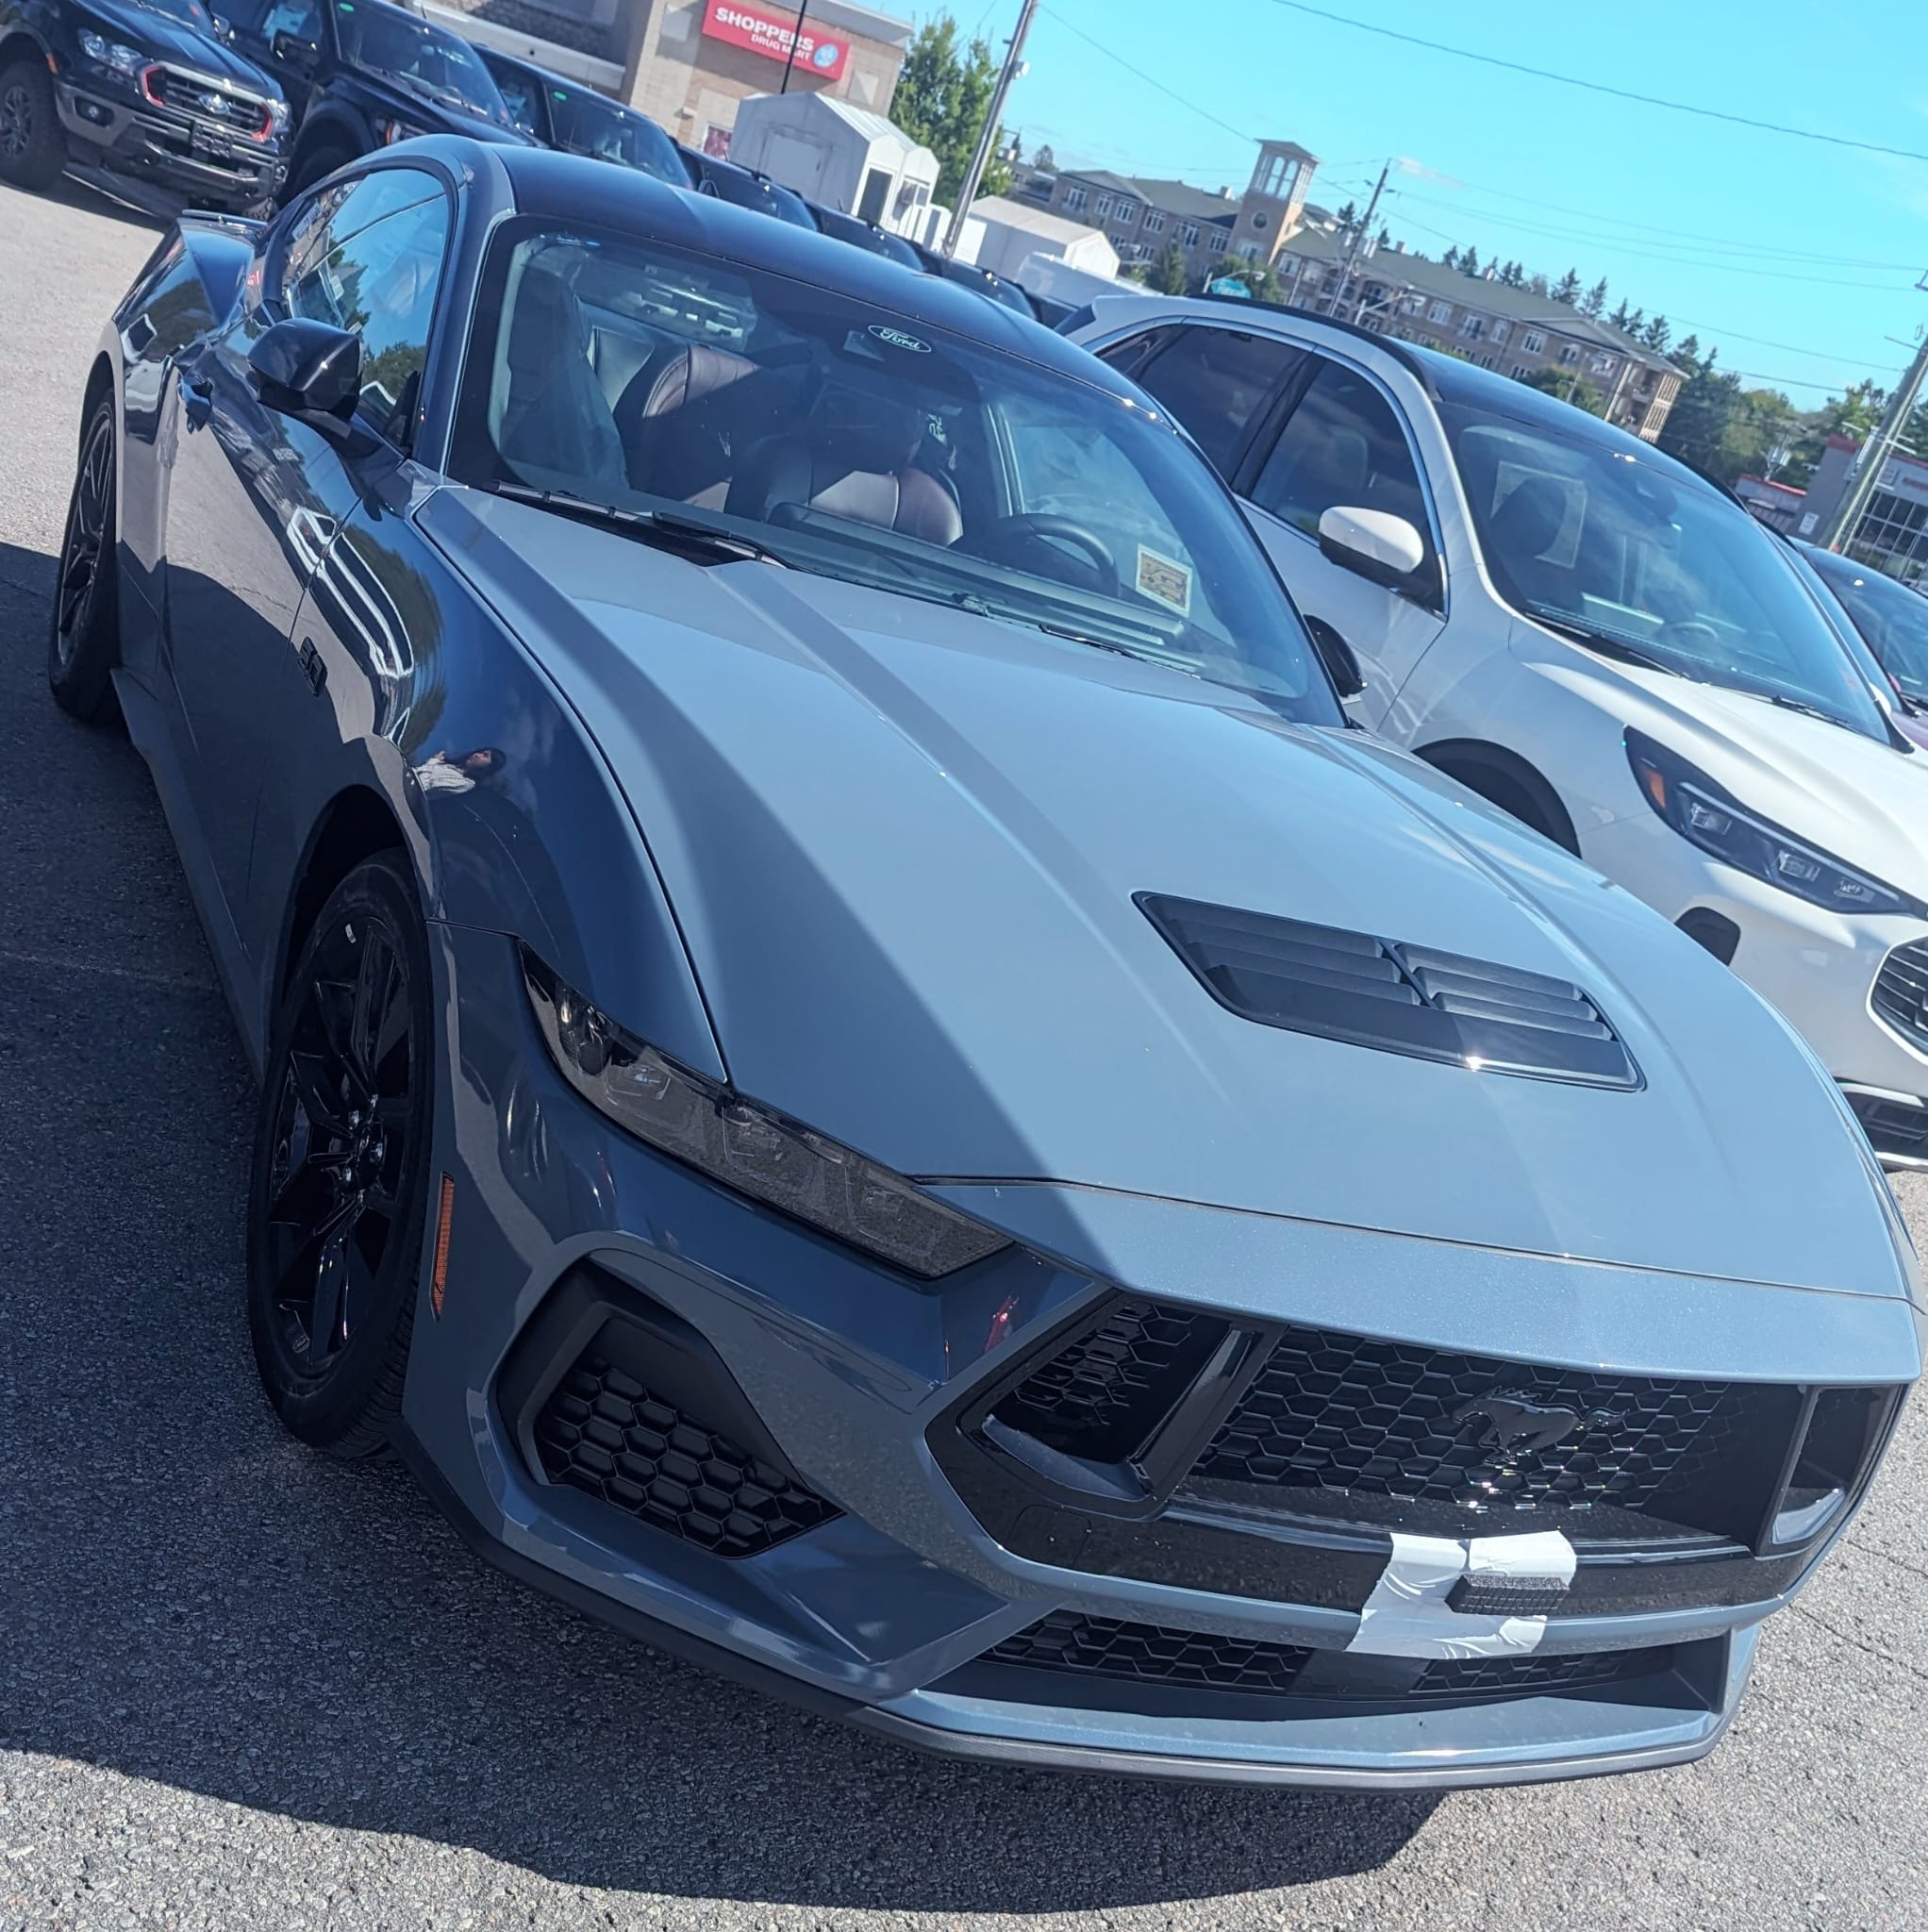 S650 Mustang Canadian delivery updates IMG-20230912-WA0002